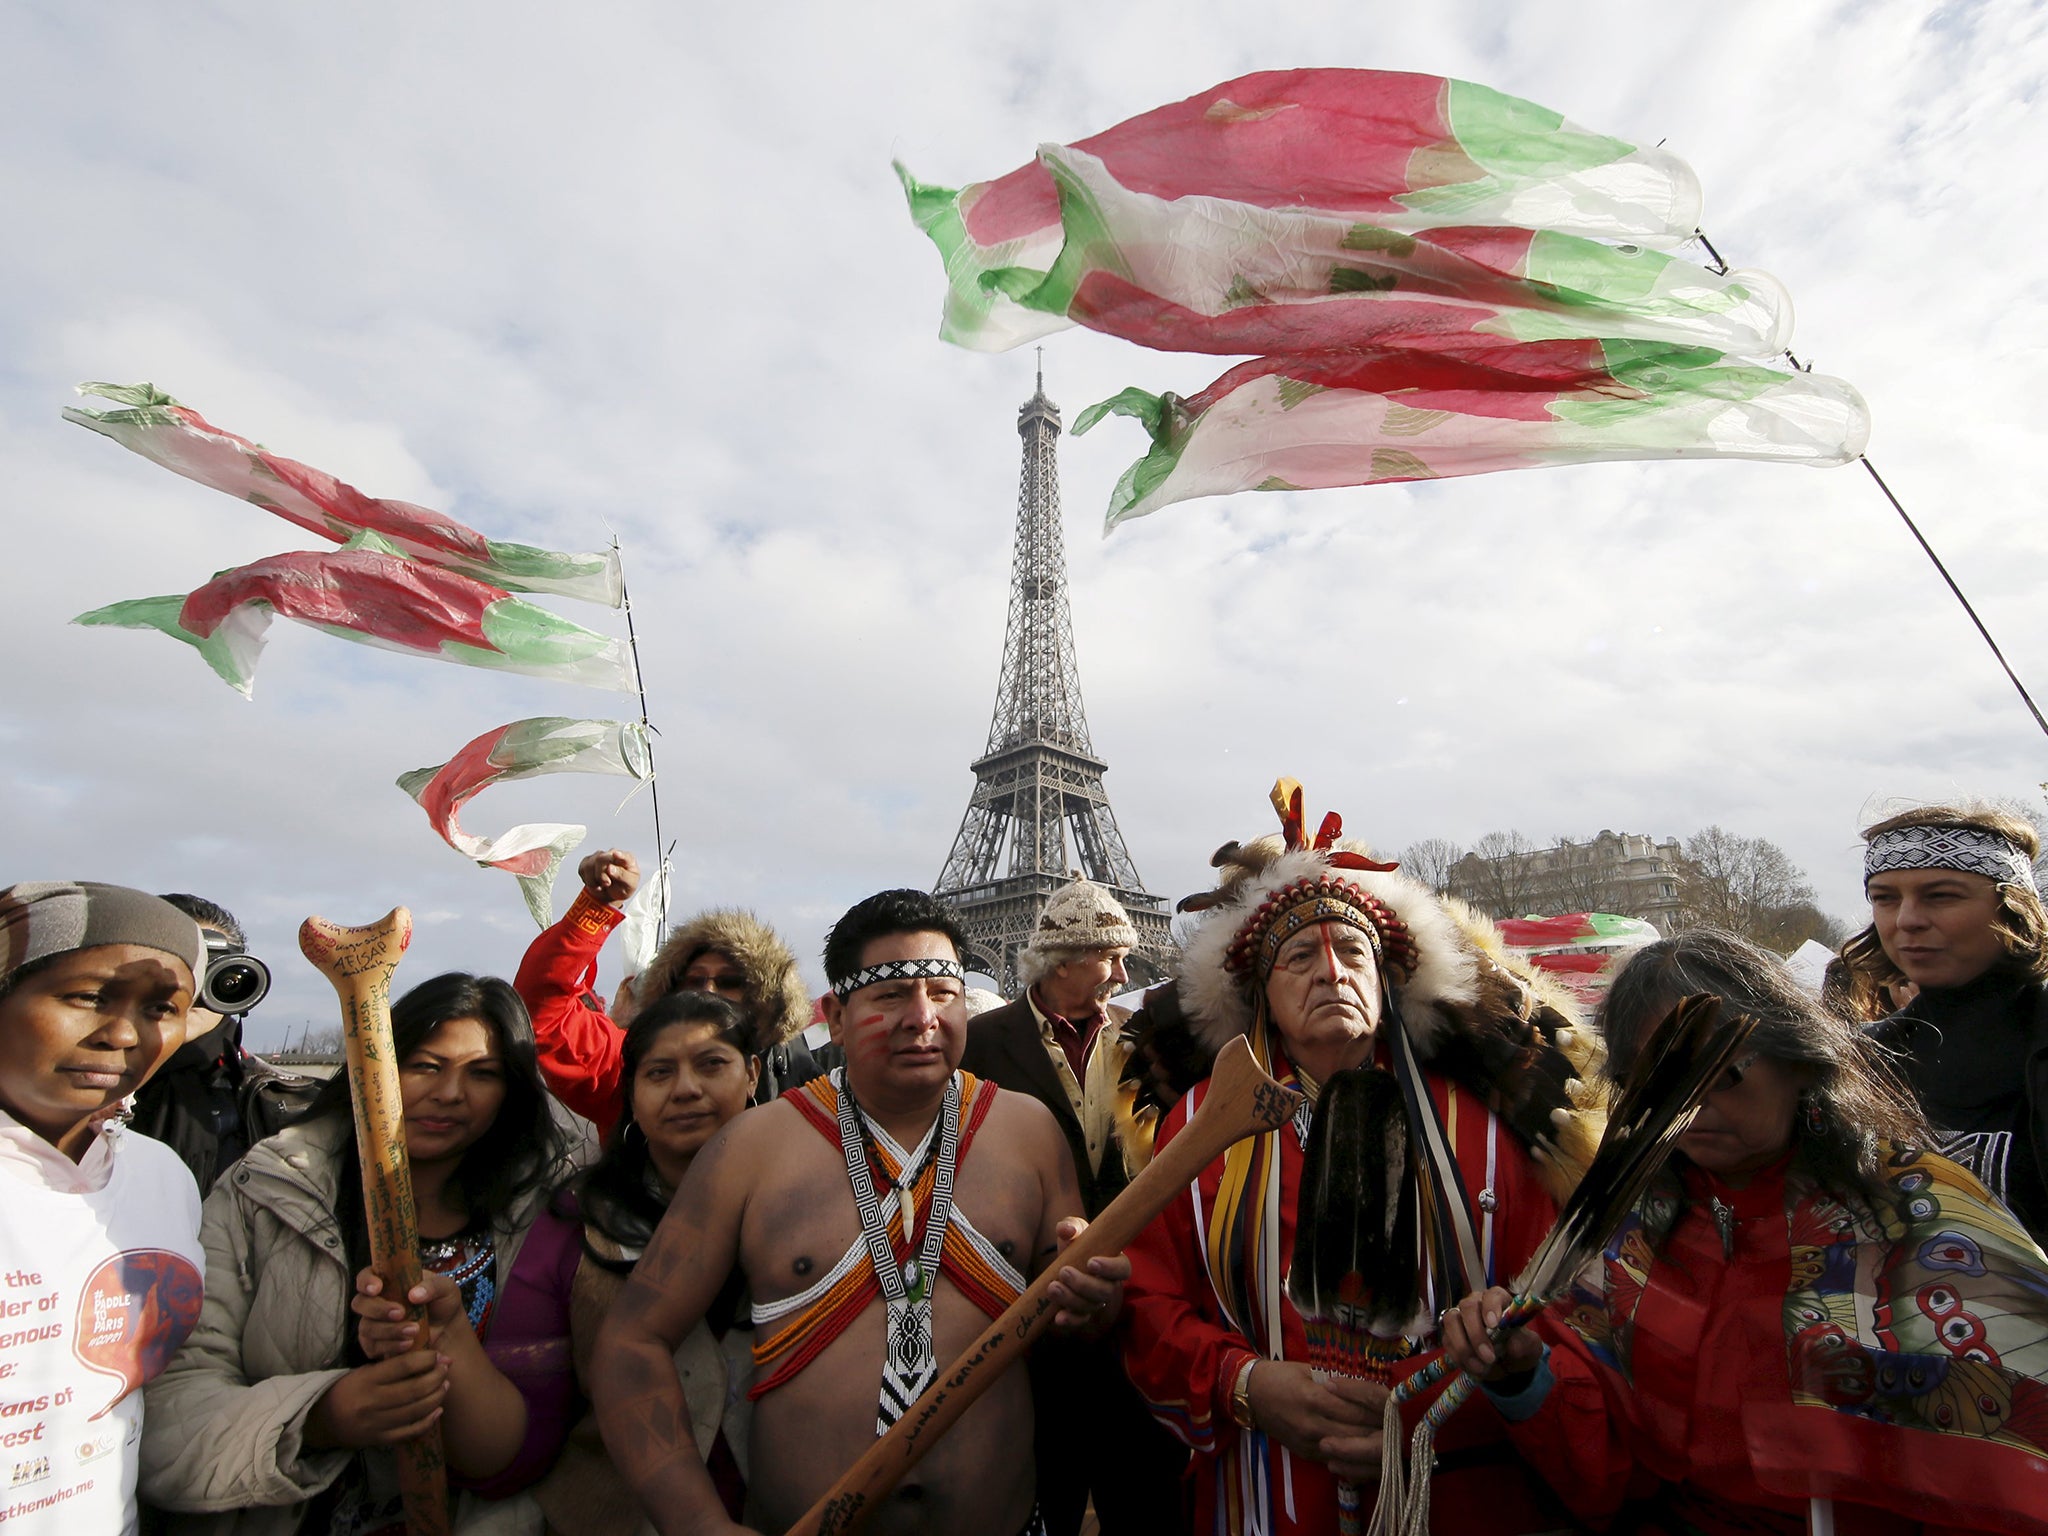 Indigenous leaders from all over the world pray as they sail on the Seine near the Eiffel Tower during a gathering demanding true climate solutions, in Paris, as the climate change conference (COP21) continues at Le Bourget near the French capital